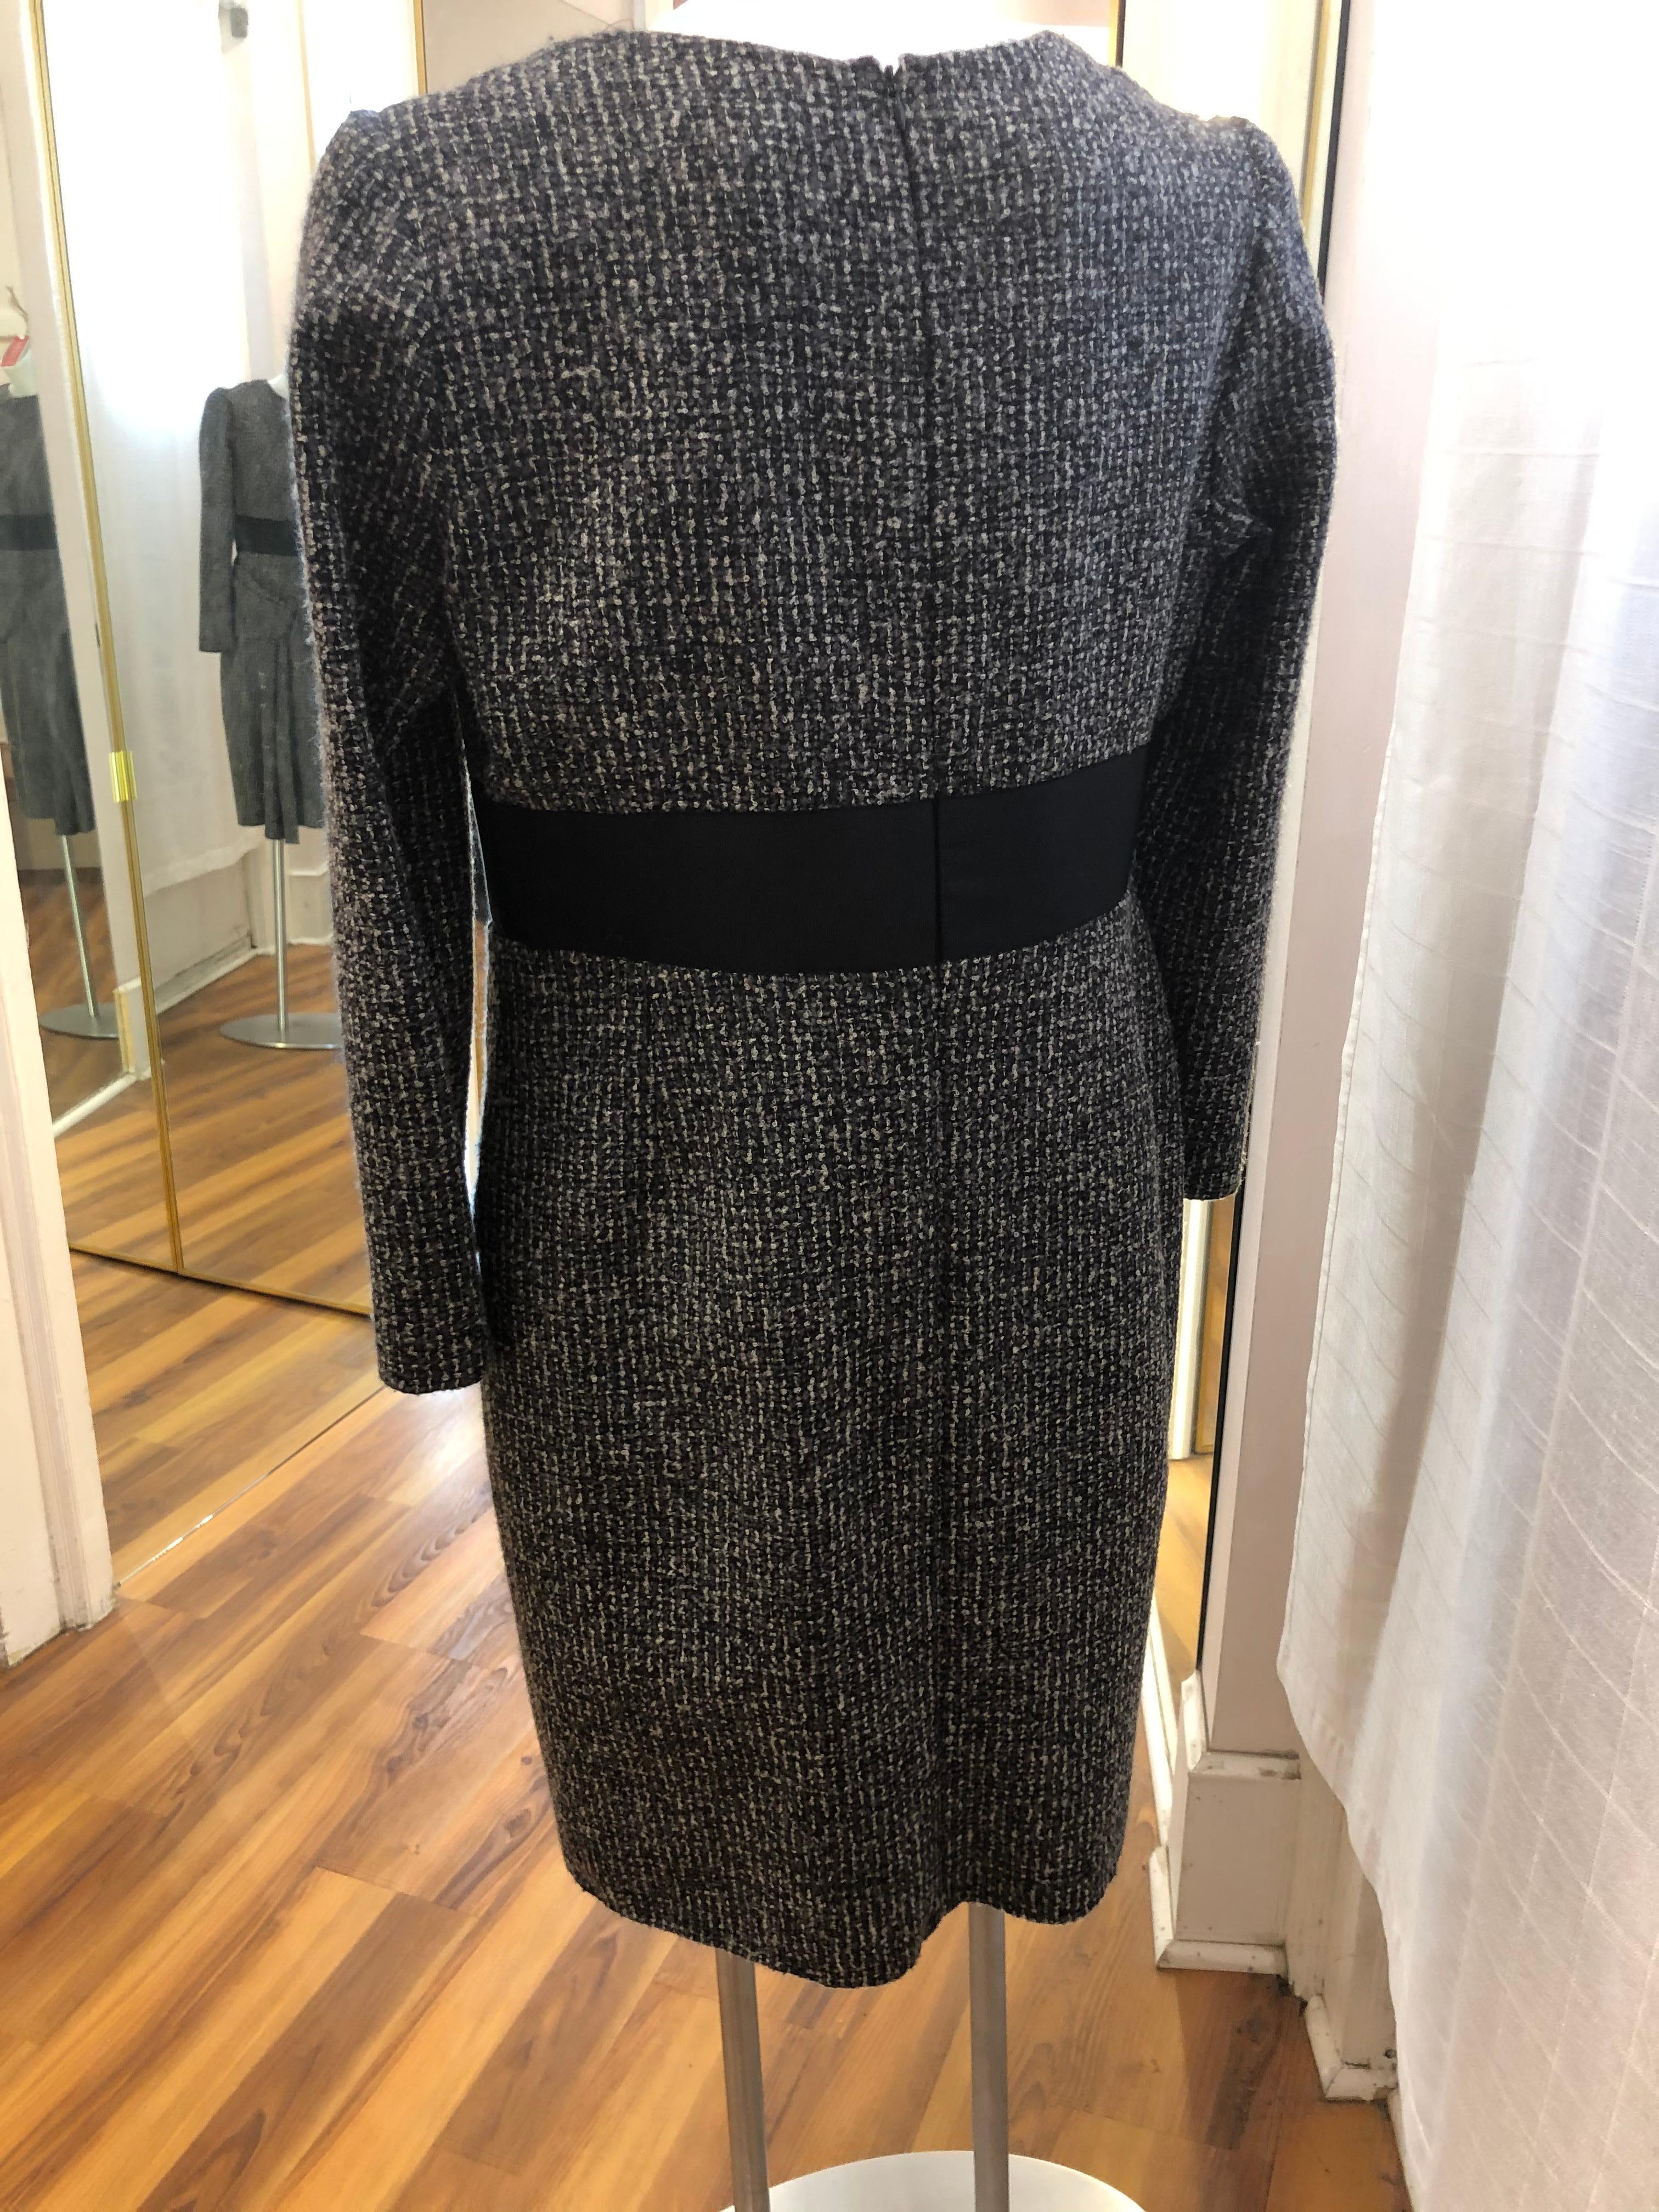 Black, grey and white tweed dress, made in Italy, with a silk lining and a gros grain black waist bend.
The tailoring is impeccable, and there are very distinctive folds on one side of the hips.